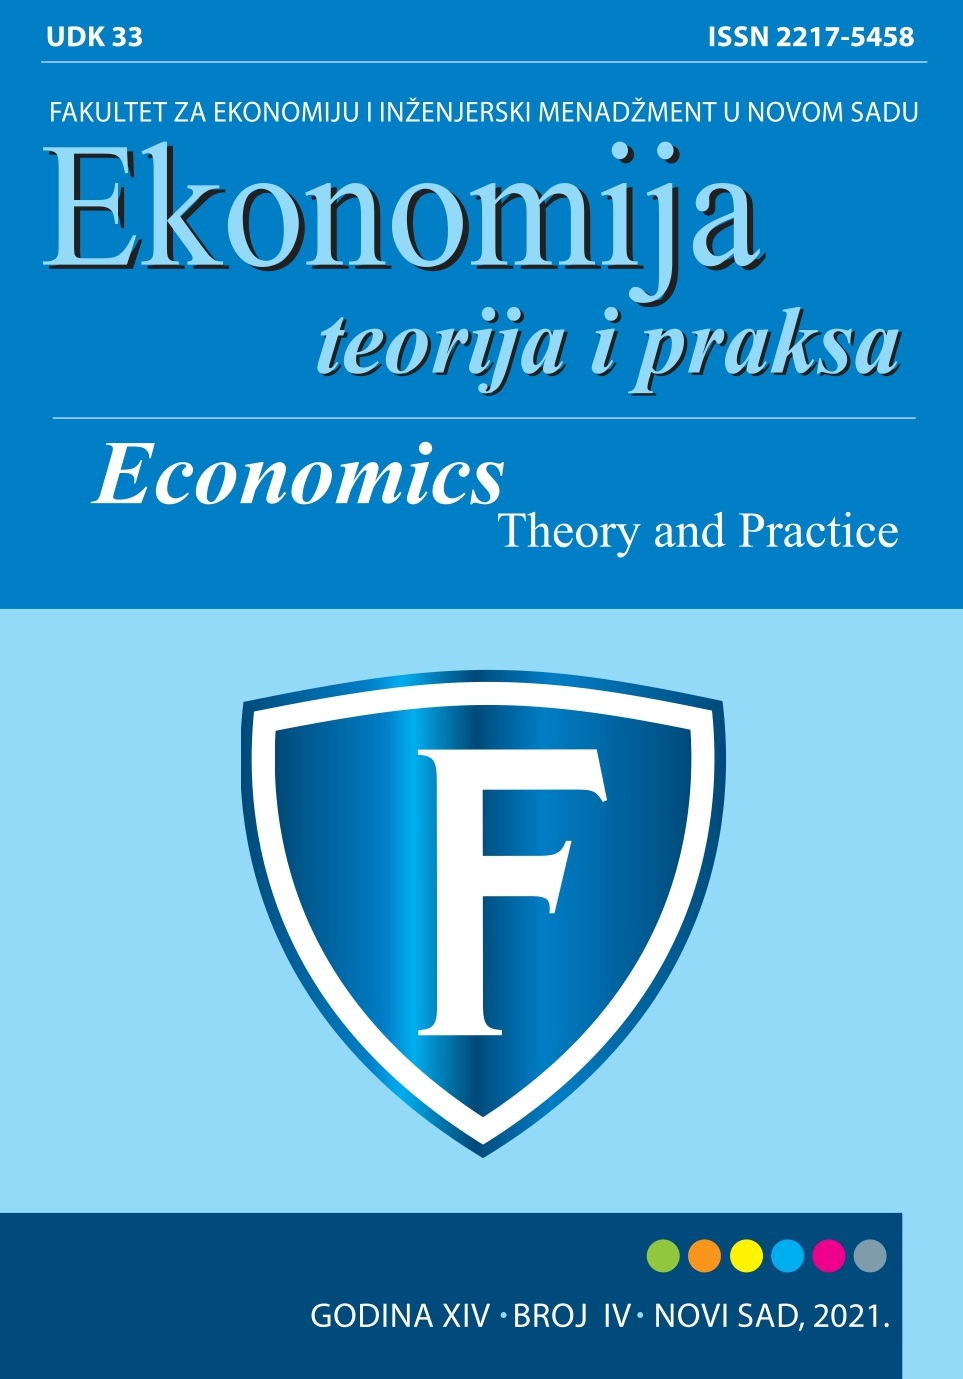 					View Vol. 14 No. 4 (2021): Economics - Theory and Practice
				